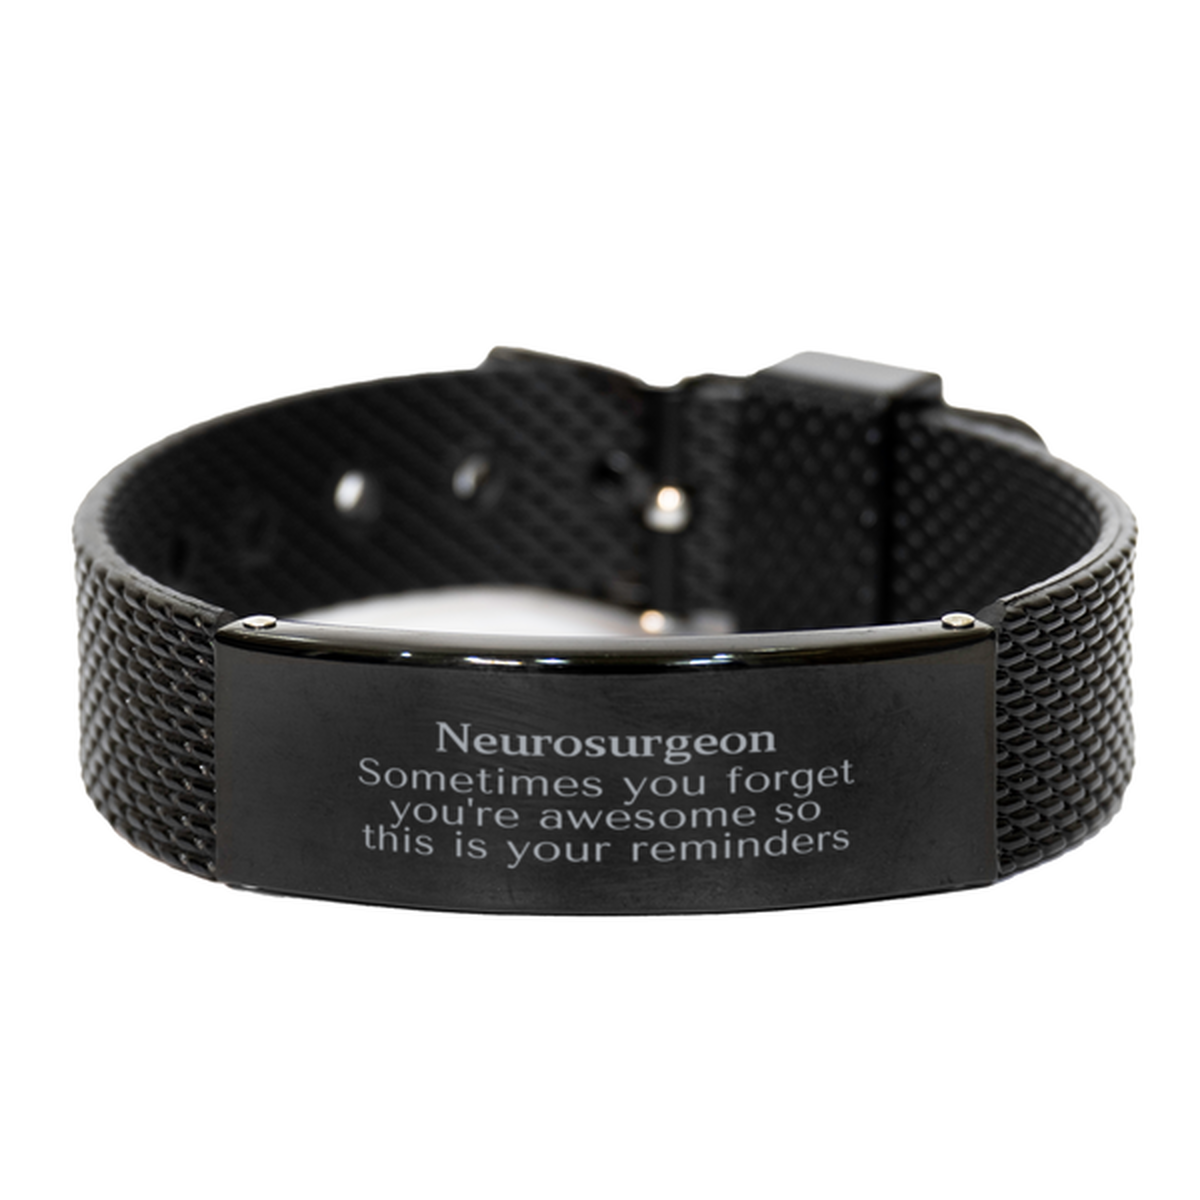 Sentimental Neurosurgeon Black Shark Mesh Bracelet, Neurosurgeon Sometimes you forget you're awesome so this is your reminders, Graduation Christmas Birthday Gifts for Neurosurgeon, Men, Women, Coworkers